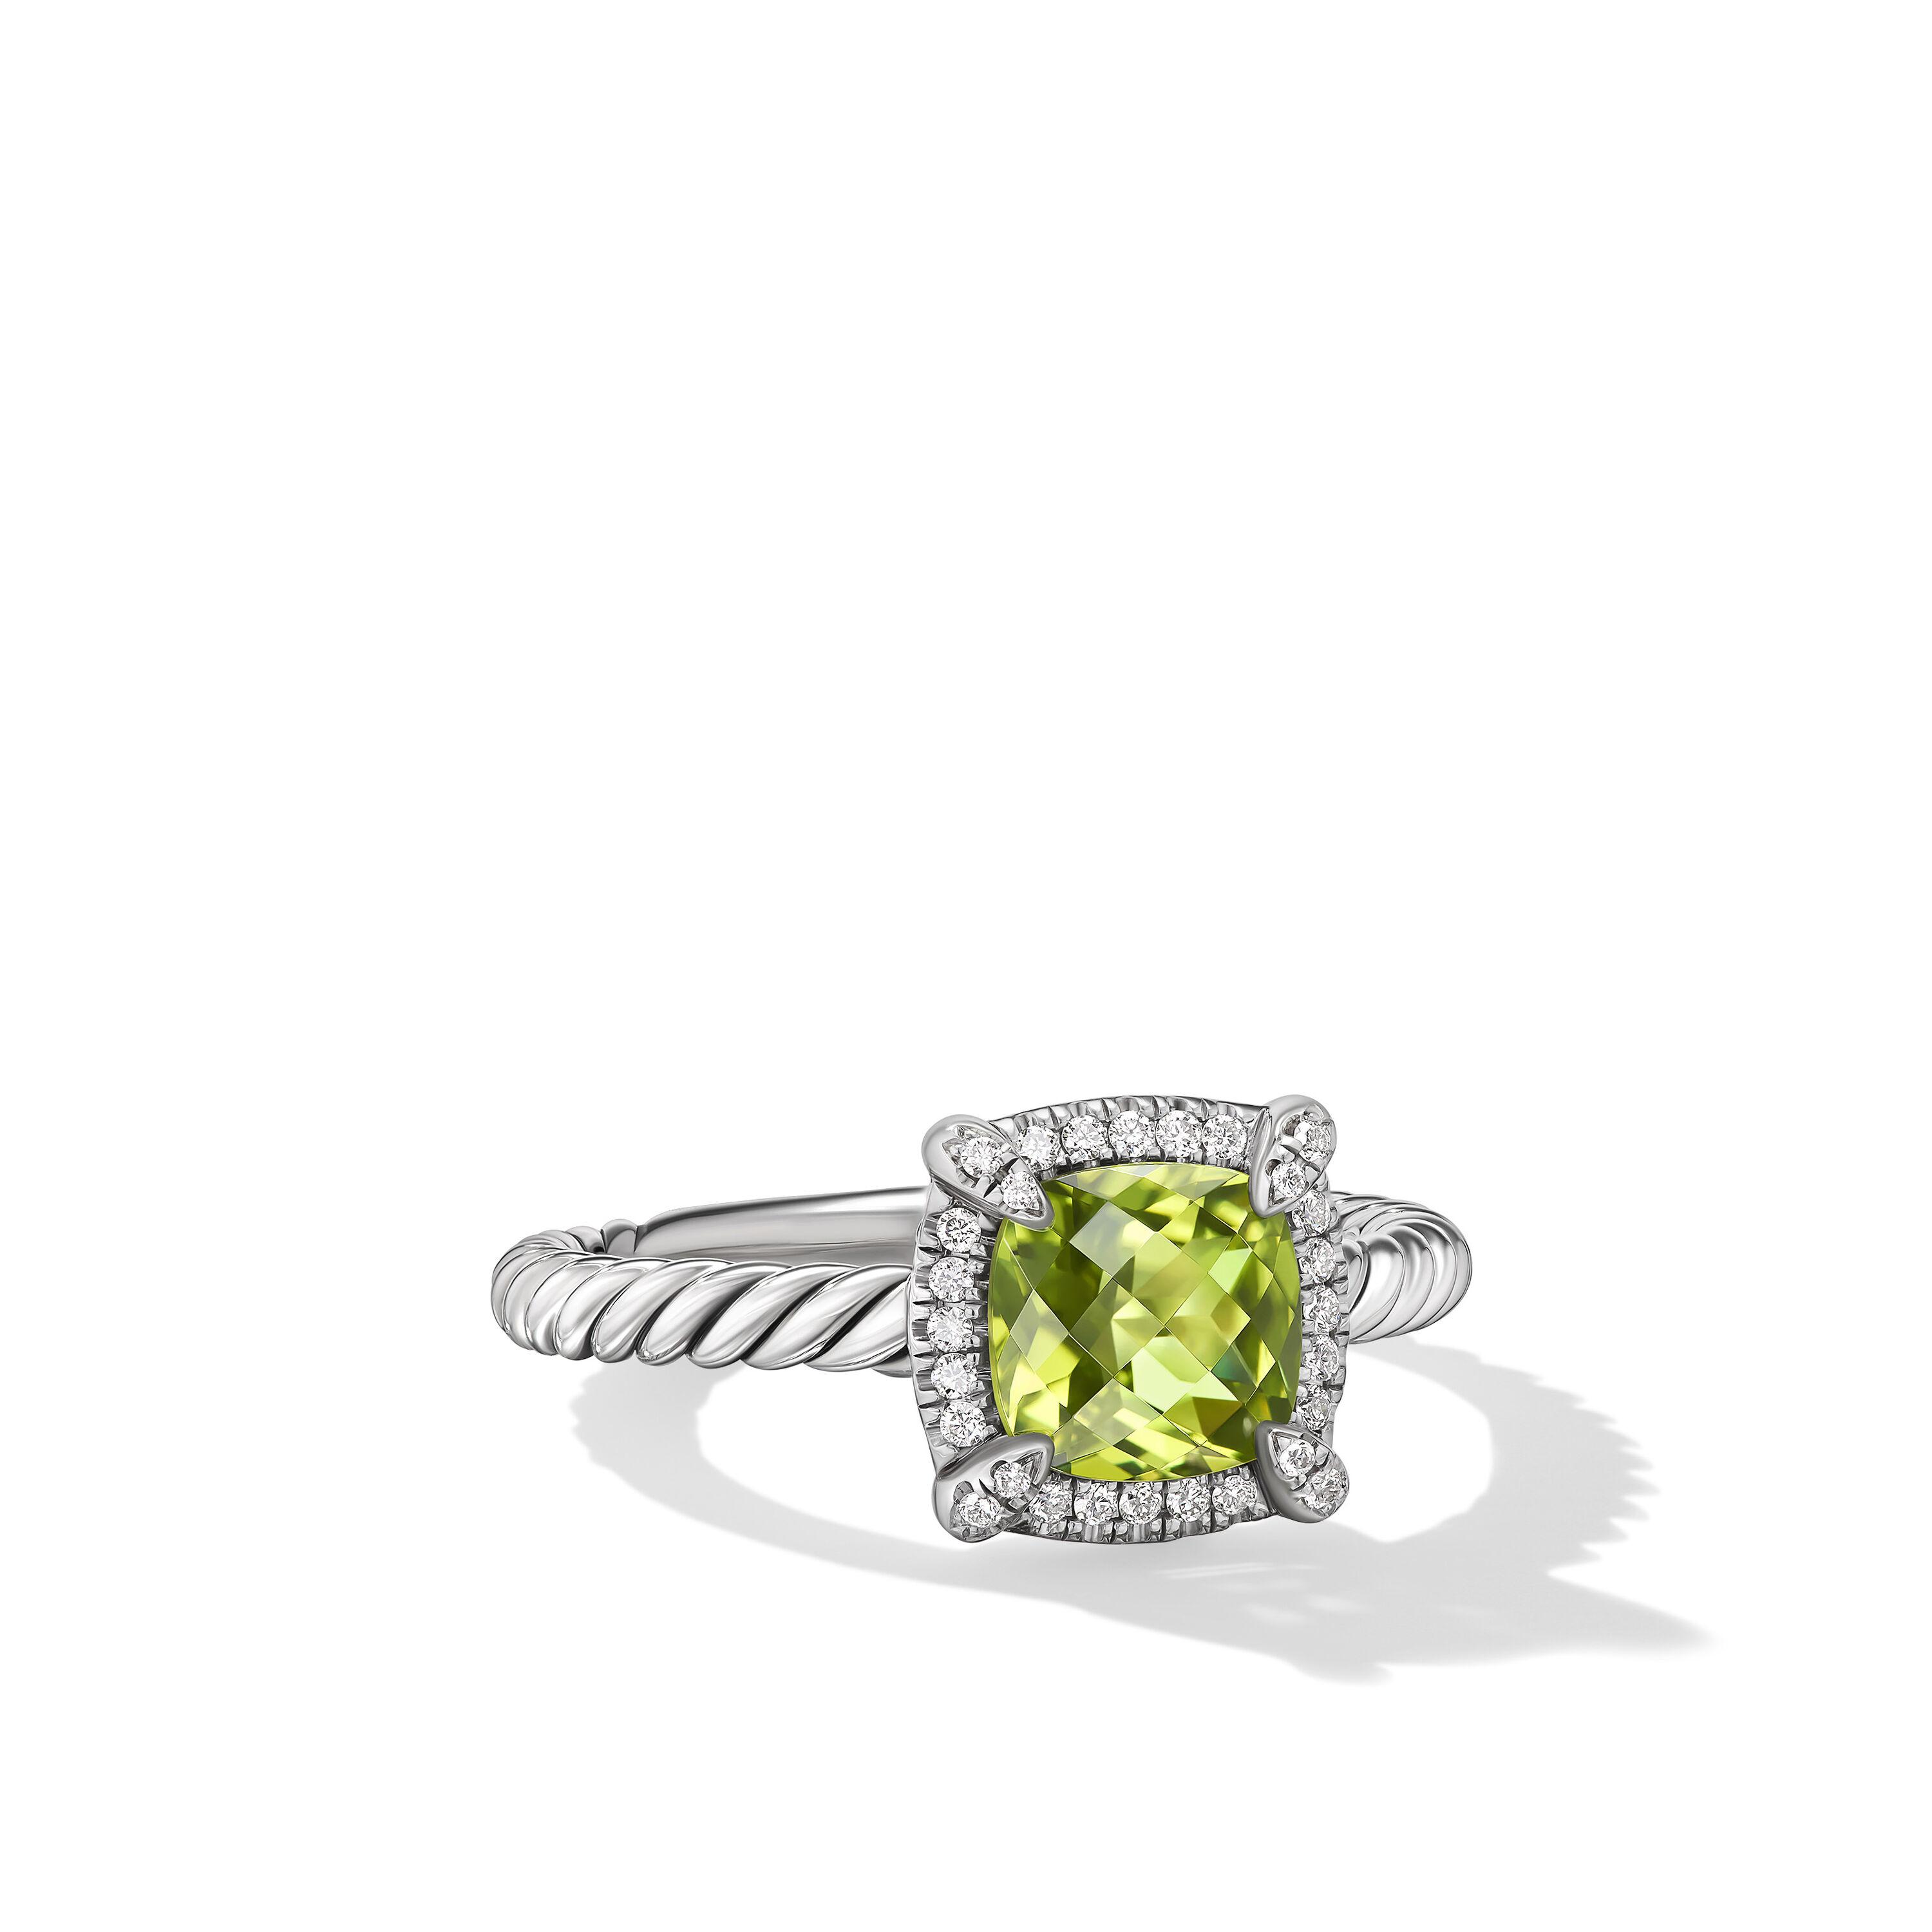 David Yurman Petite Chatelaine Pave Bezel Ring in Sterling Silver with Peridot and Diamonds, Size 6.5 0